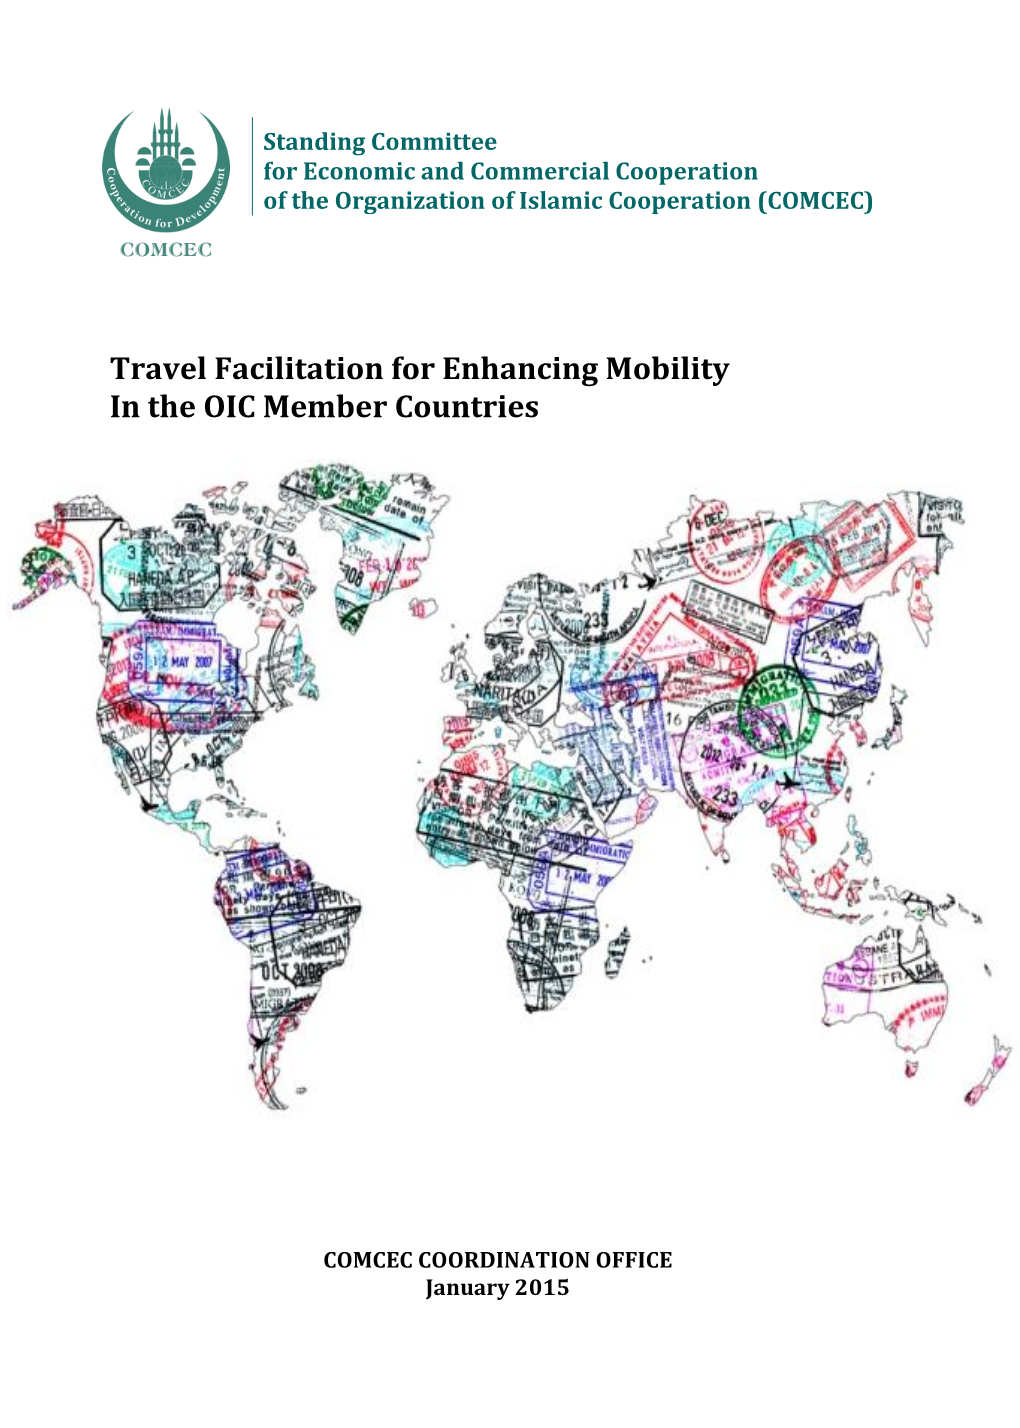 Travel Facilitation for Enhancing Mobility in the OIC Member Countries